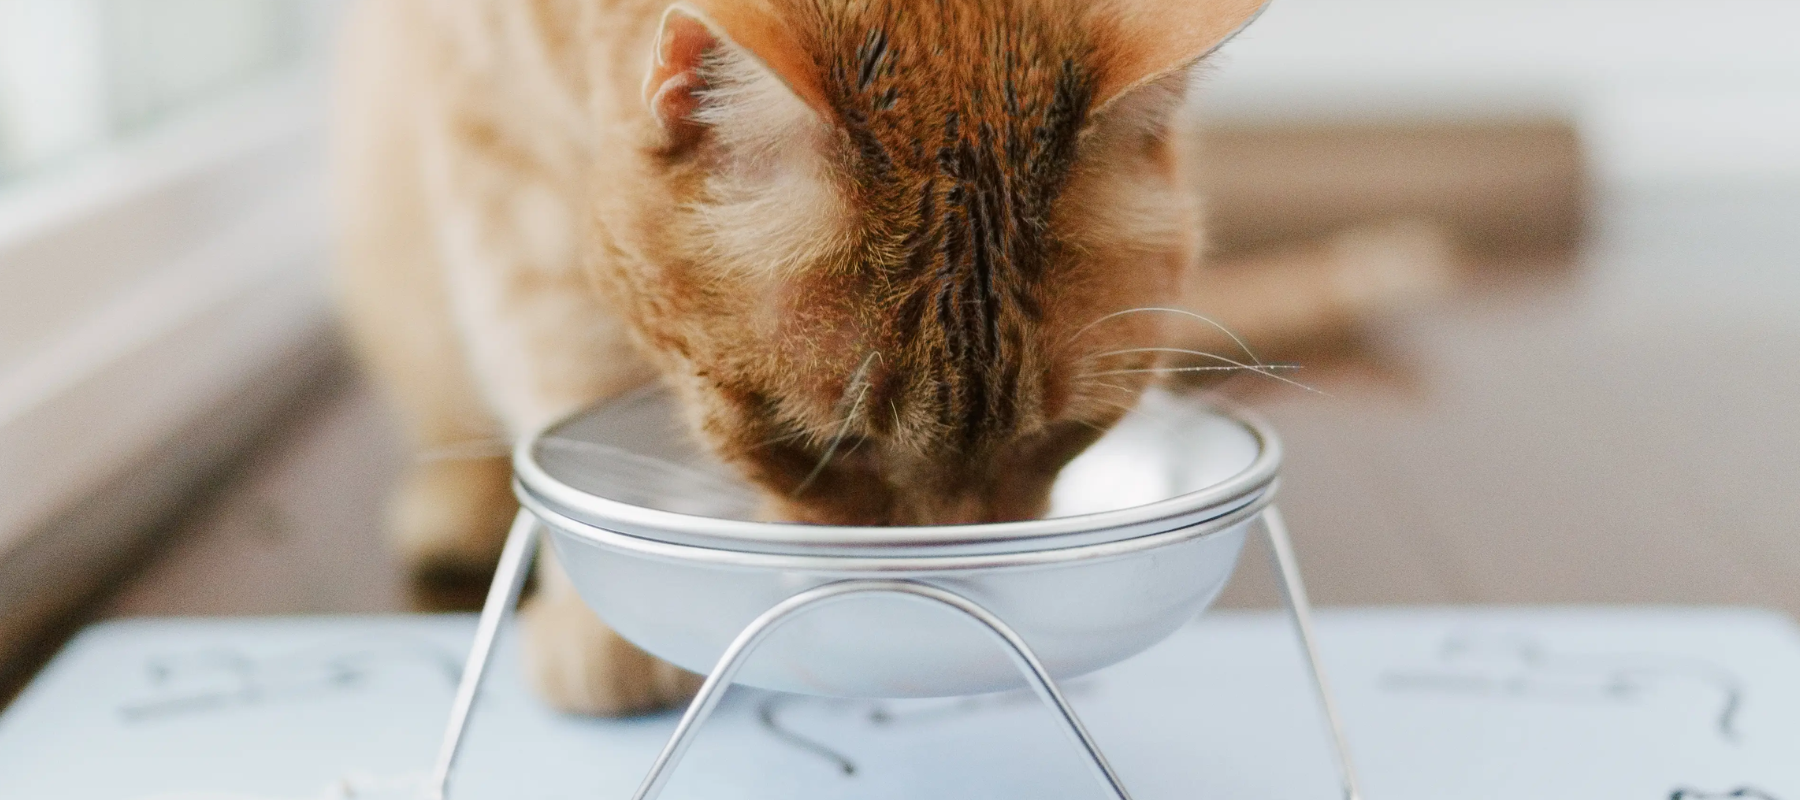 Sustainable Dog and Cat Bowls - Cat eating from Americat Pet Bowl on Stand